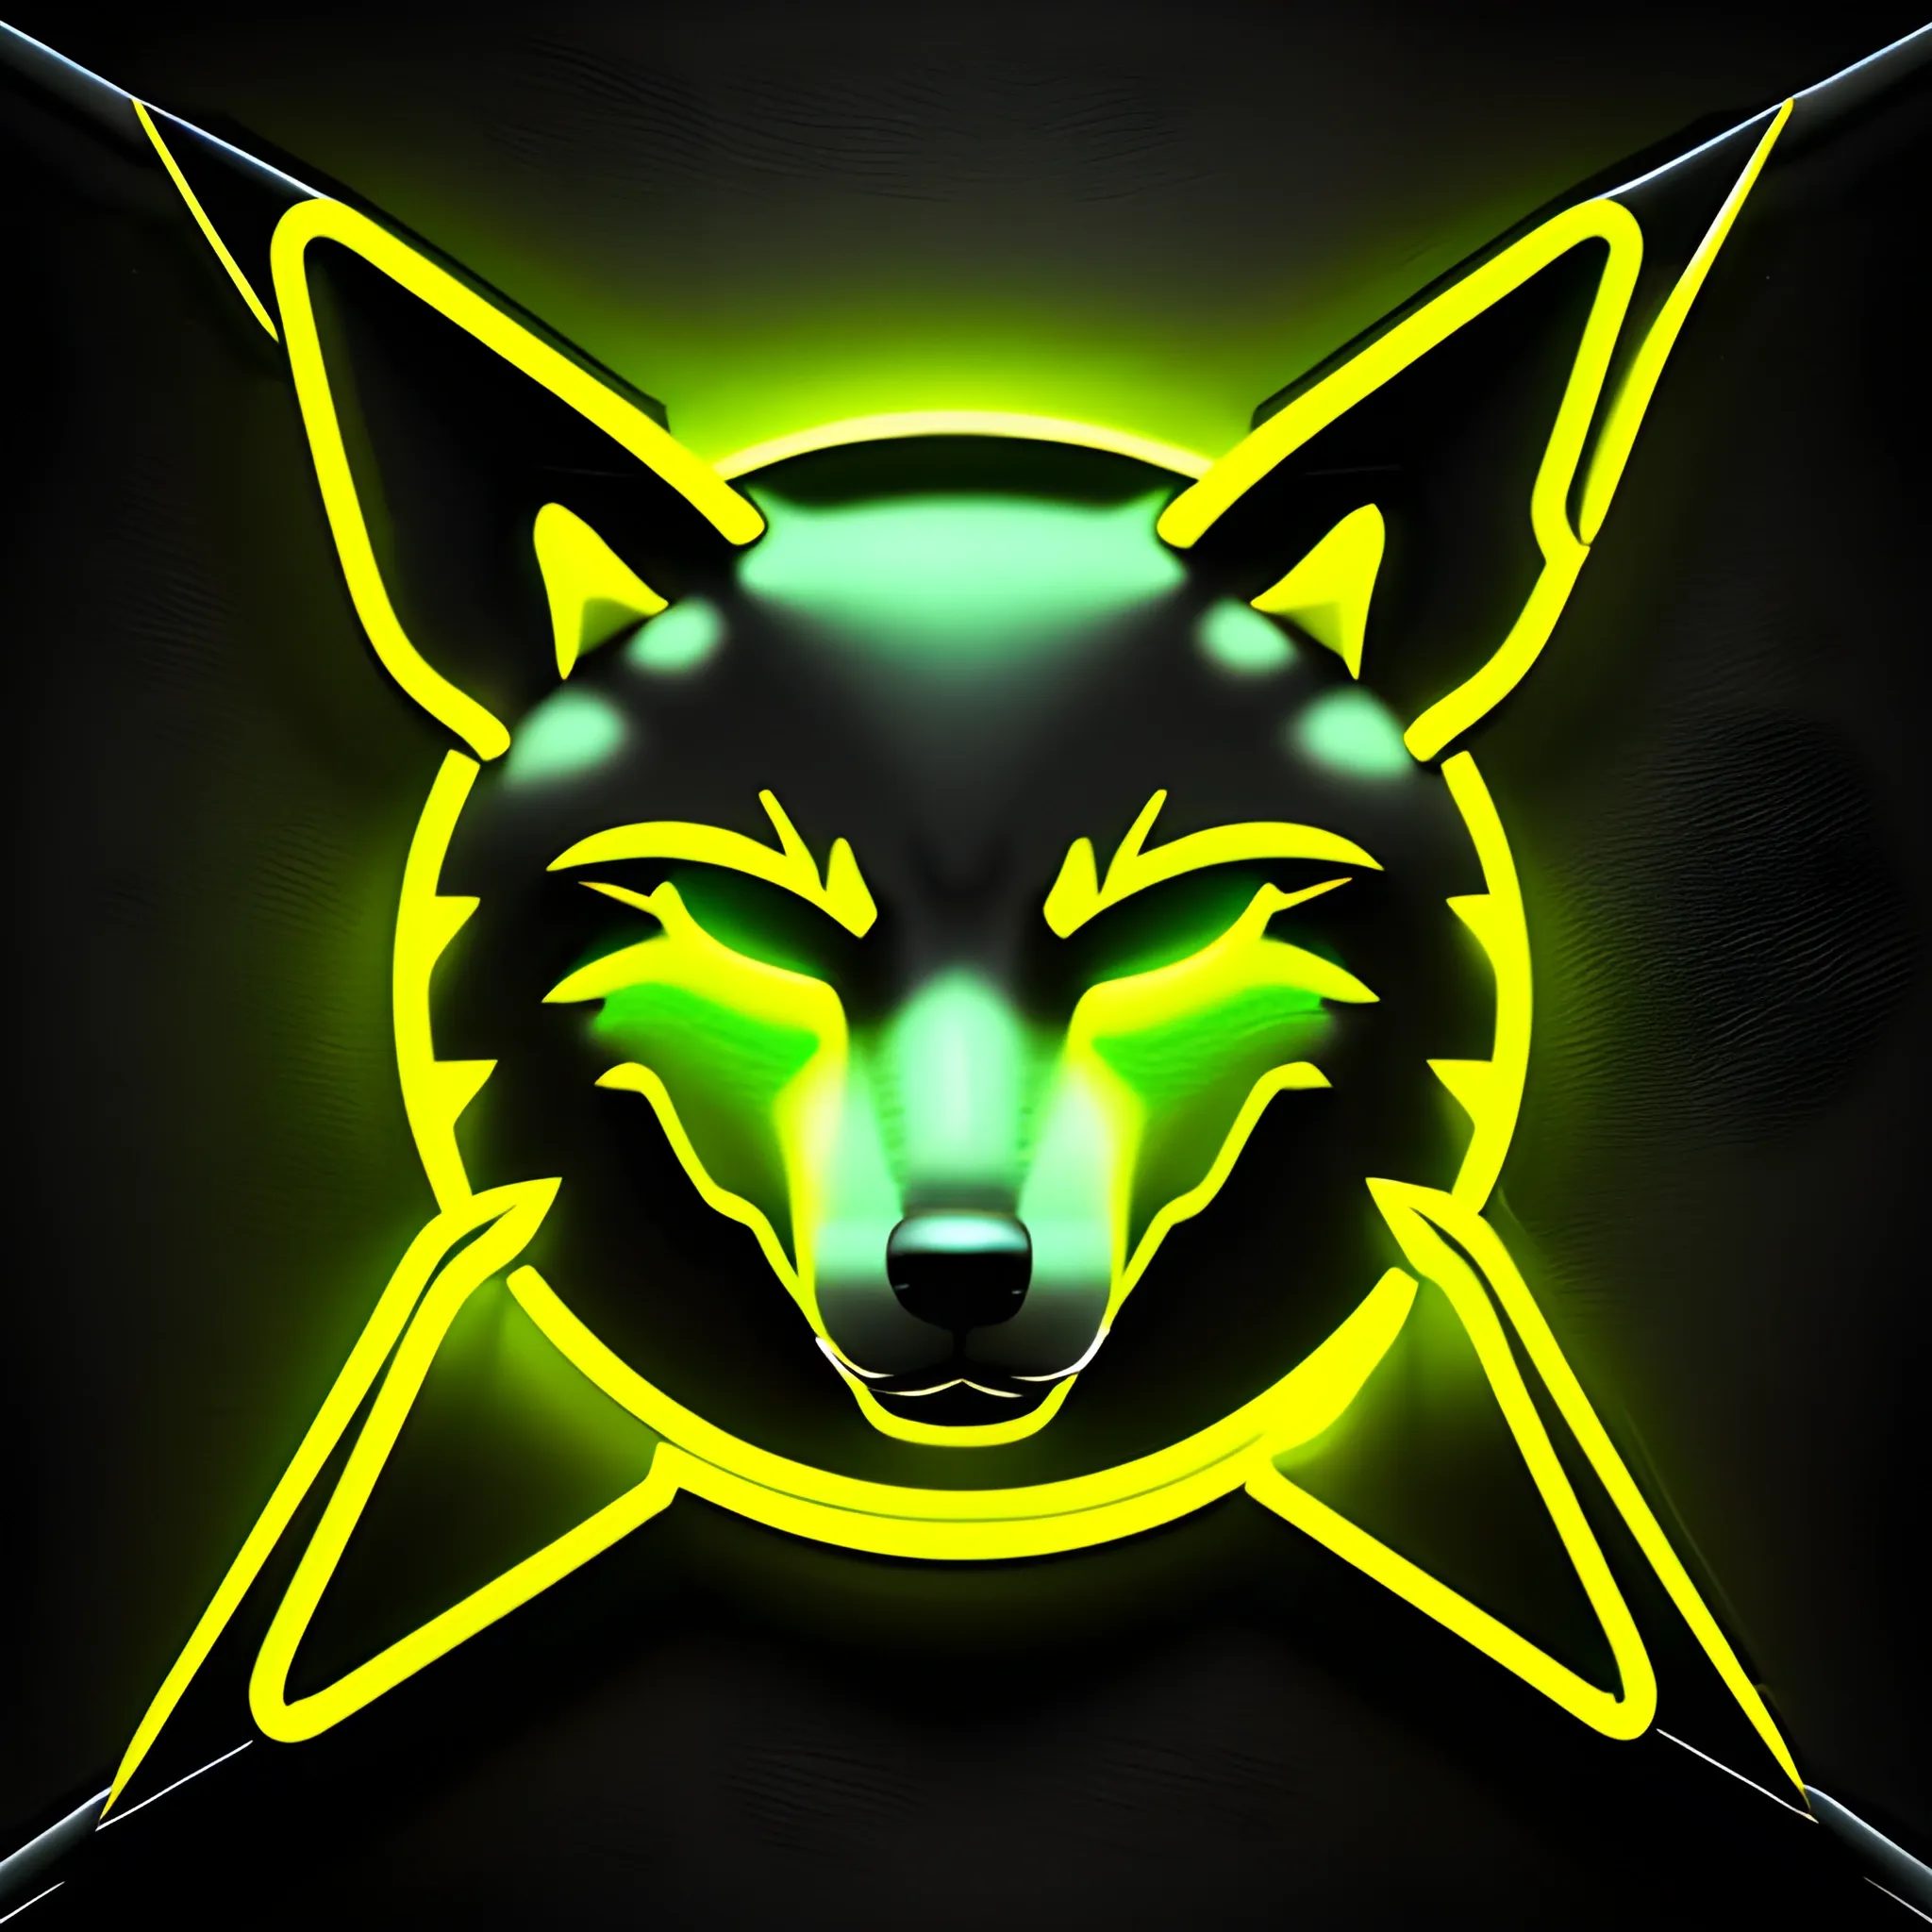 An angry Matrix wolf logo with the letter "A" at the background, using the yellow neon color, 3D